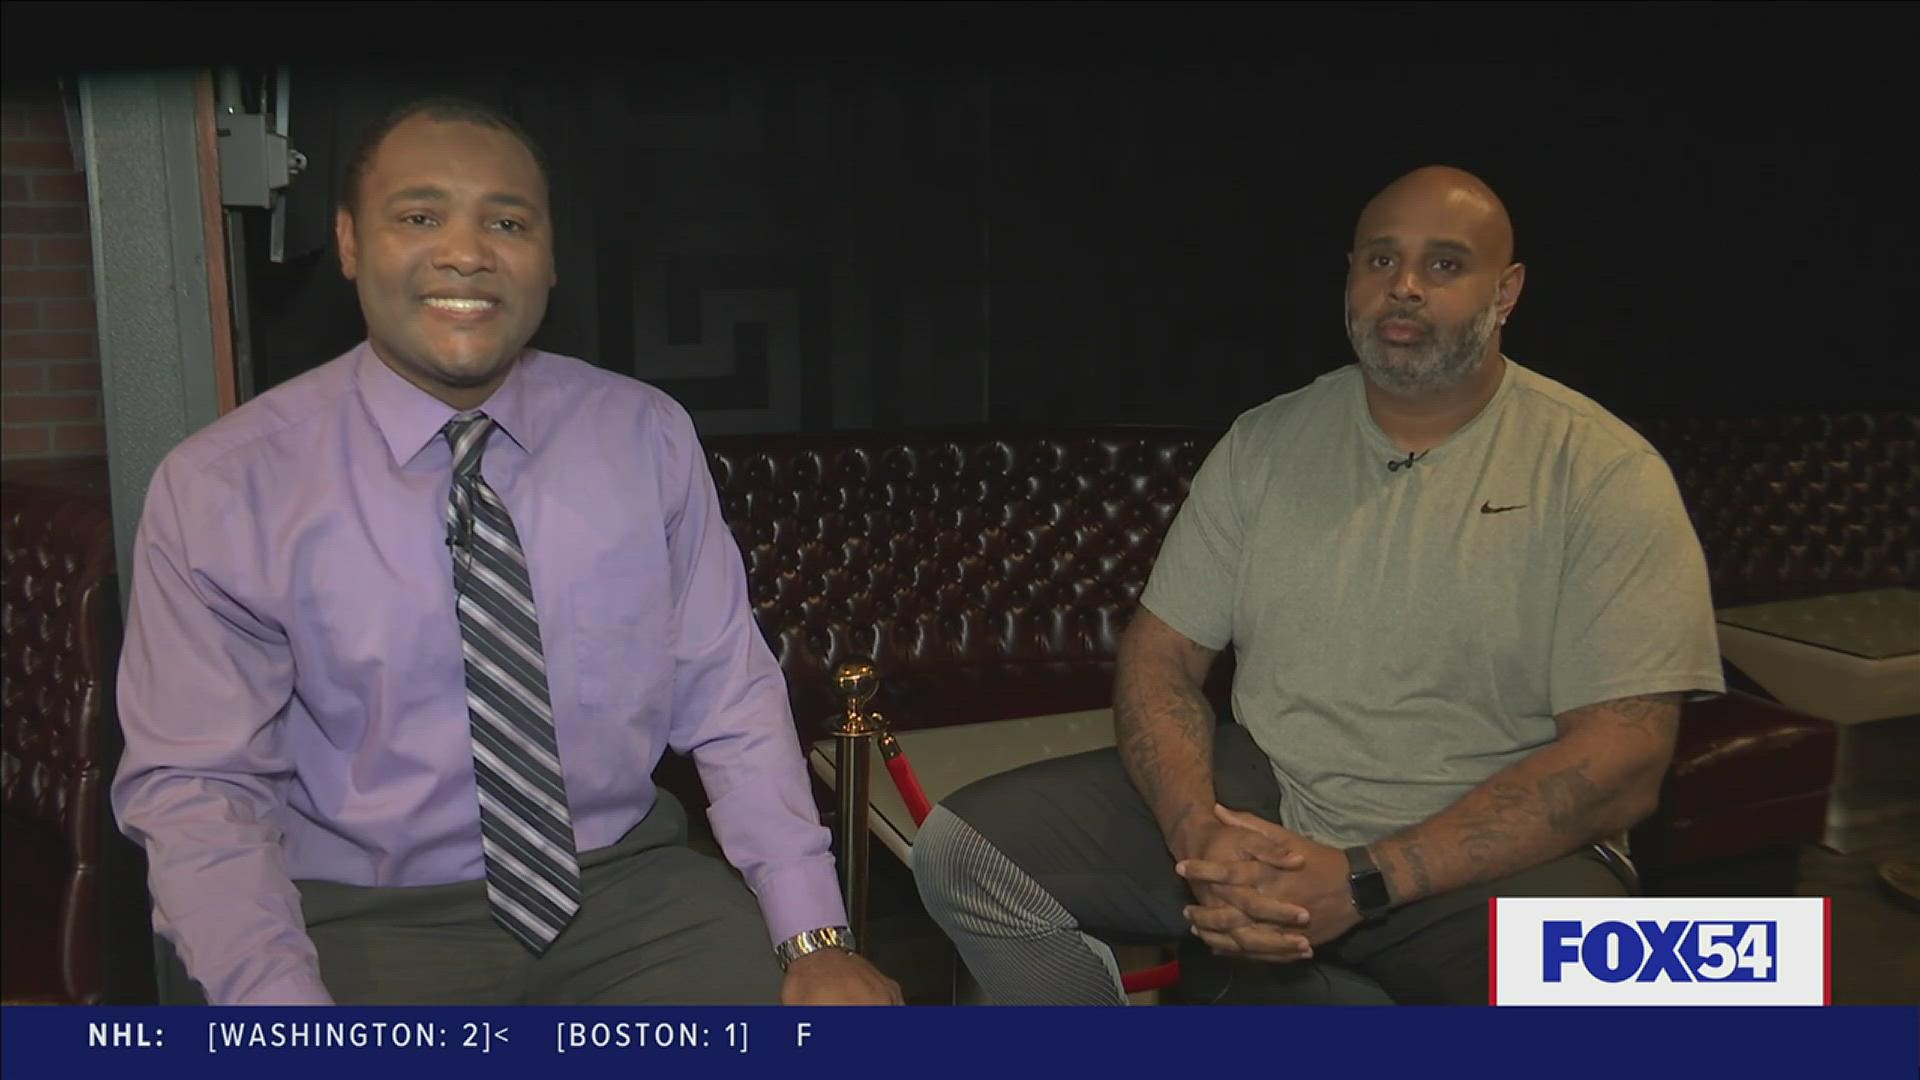 Recently, FOX54 Sports Director Mo Carter spoke with Huntsville native Rashad Moore. Moore was on the 2007 New England Patriots team that played in Super Bowl XLII